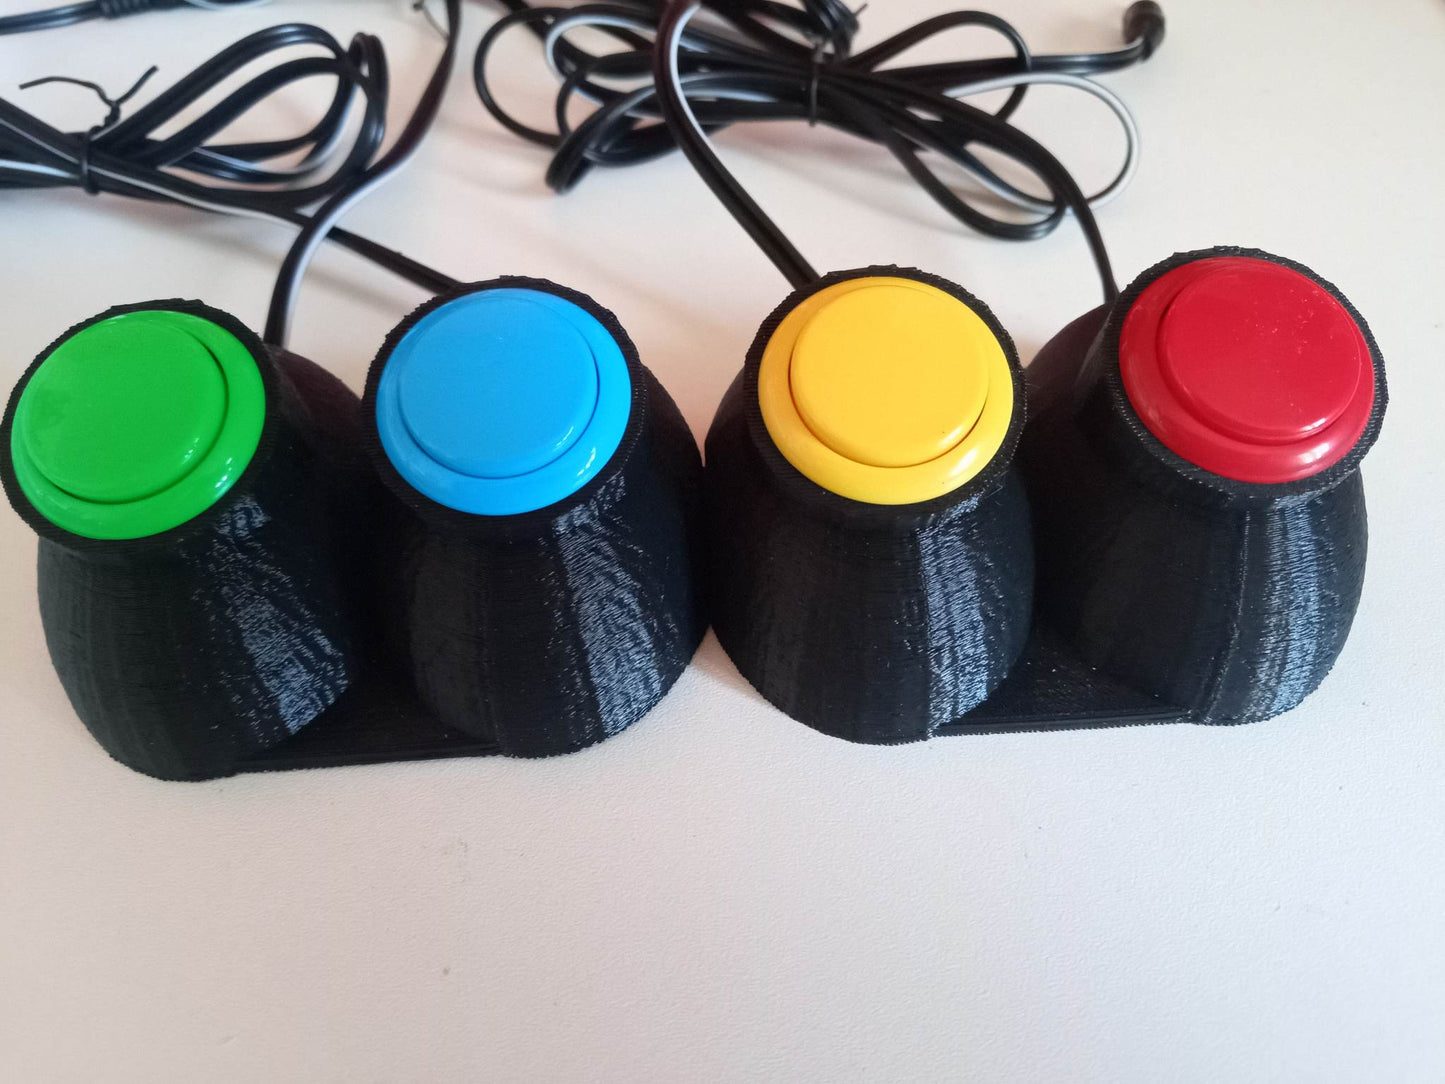 Arcade foot switches